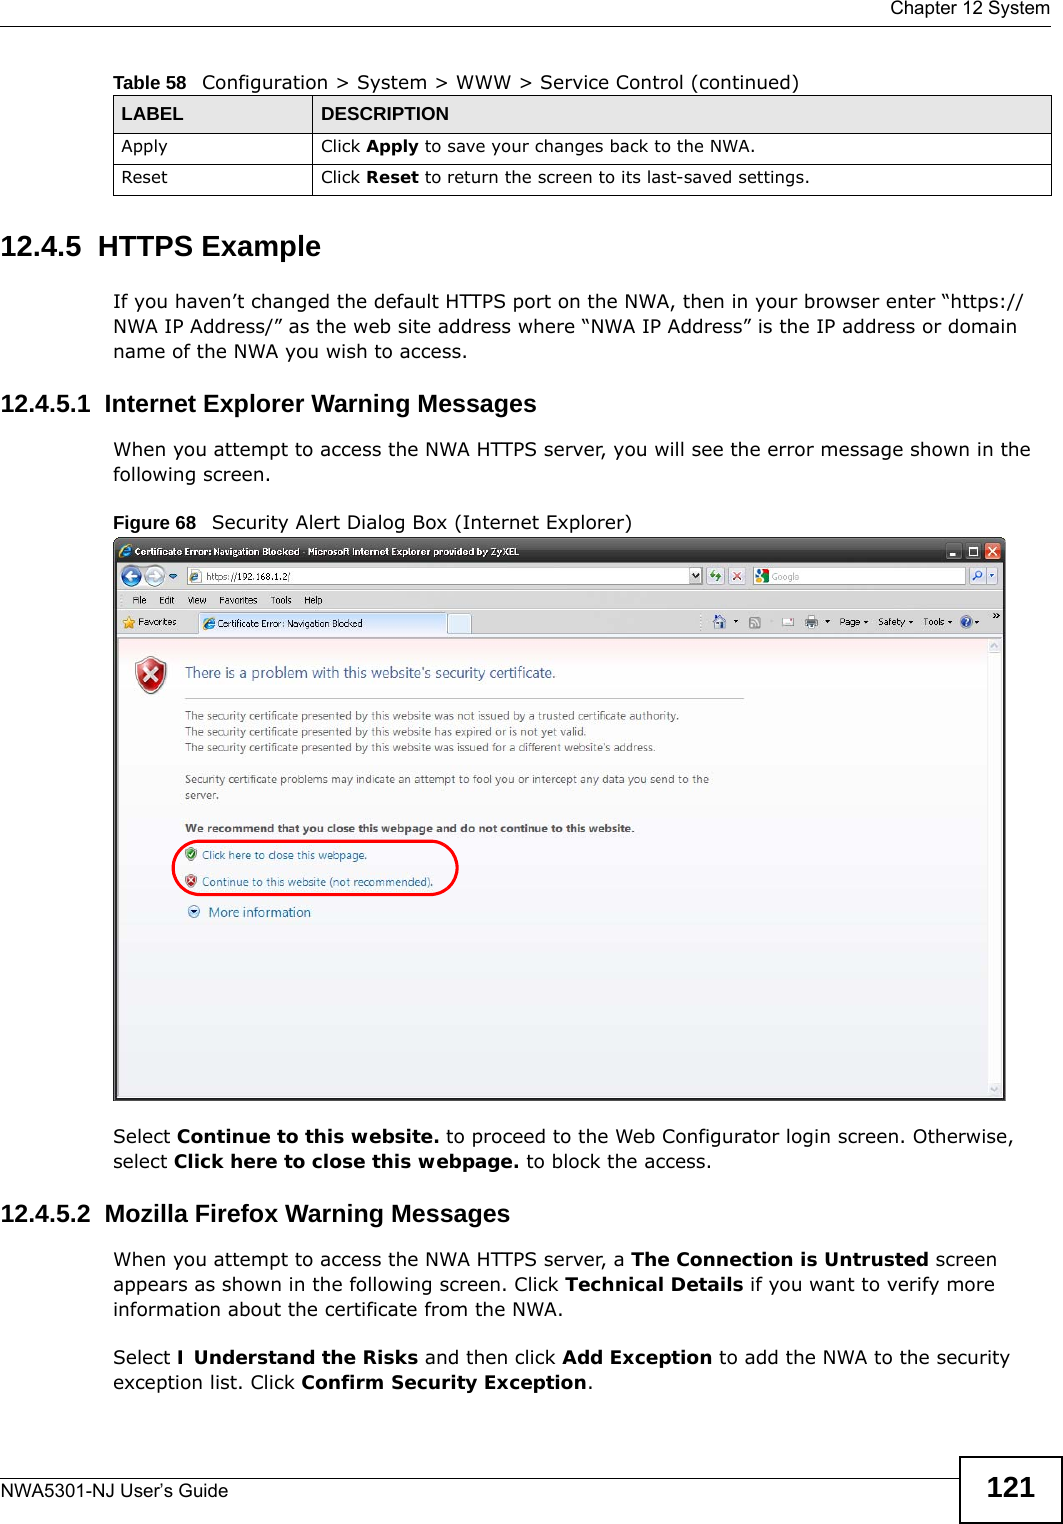  Chapter 12 SystemNWA5301-NJ User’s Guide 12112.4.5  HTTPS ExampleIf you haven’t changed the default HTTPS port on the NWA, then in your browser enter “https://NWA IP Address/” as the web site address where “NWA IP Address” is the IP address or domain name of the NWA you wish to access.12.4.5.1  Internet Explorer Warning MessagesWhen you attempt to access the NWA HTTPS server, you will see the error message shown in the following screen.Figure 68   Security Alert Dialog Box (Internet Explorer)Select Continue to this website. to proceed to the Web Configurator login screen. Otherwise, select Click here to close this webpage. to block the access.12.4.5.2  Mozilla Firefox Warning MessagesWhen you attempt to access the NWA HTTPS server, a The Connection is Untrusted screen appears as shown in the following screen. Click Technical Details if you want to verify more information about the certificate from the NWA.Select I Understand the Risks and then click Add Exception to add the NWA to the security exception list. Click Confirm Security Exception.Apply Click Apply to save your changes back to the NWA. Reset Click Reset to return the screen to its last-saved settings. Table 58   Configuration &gt; System &gt; WWW &gt; Service Control (continued)LABEL DESCRIPTION